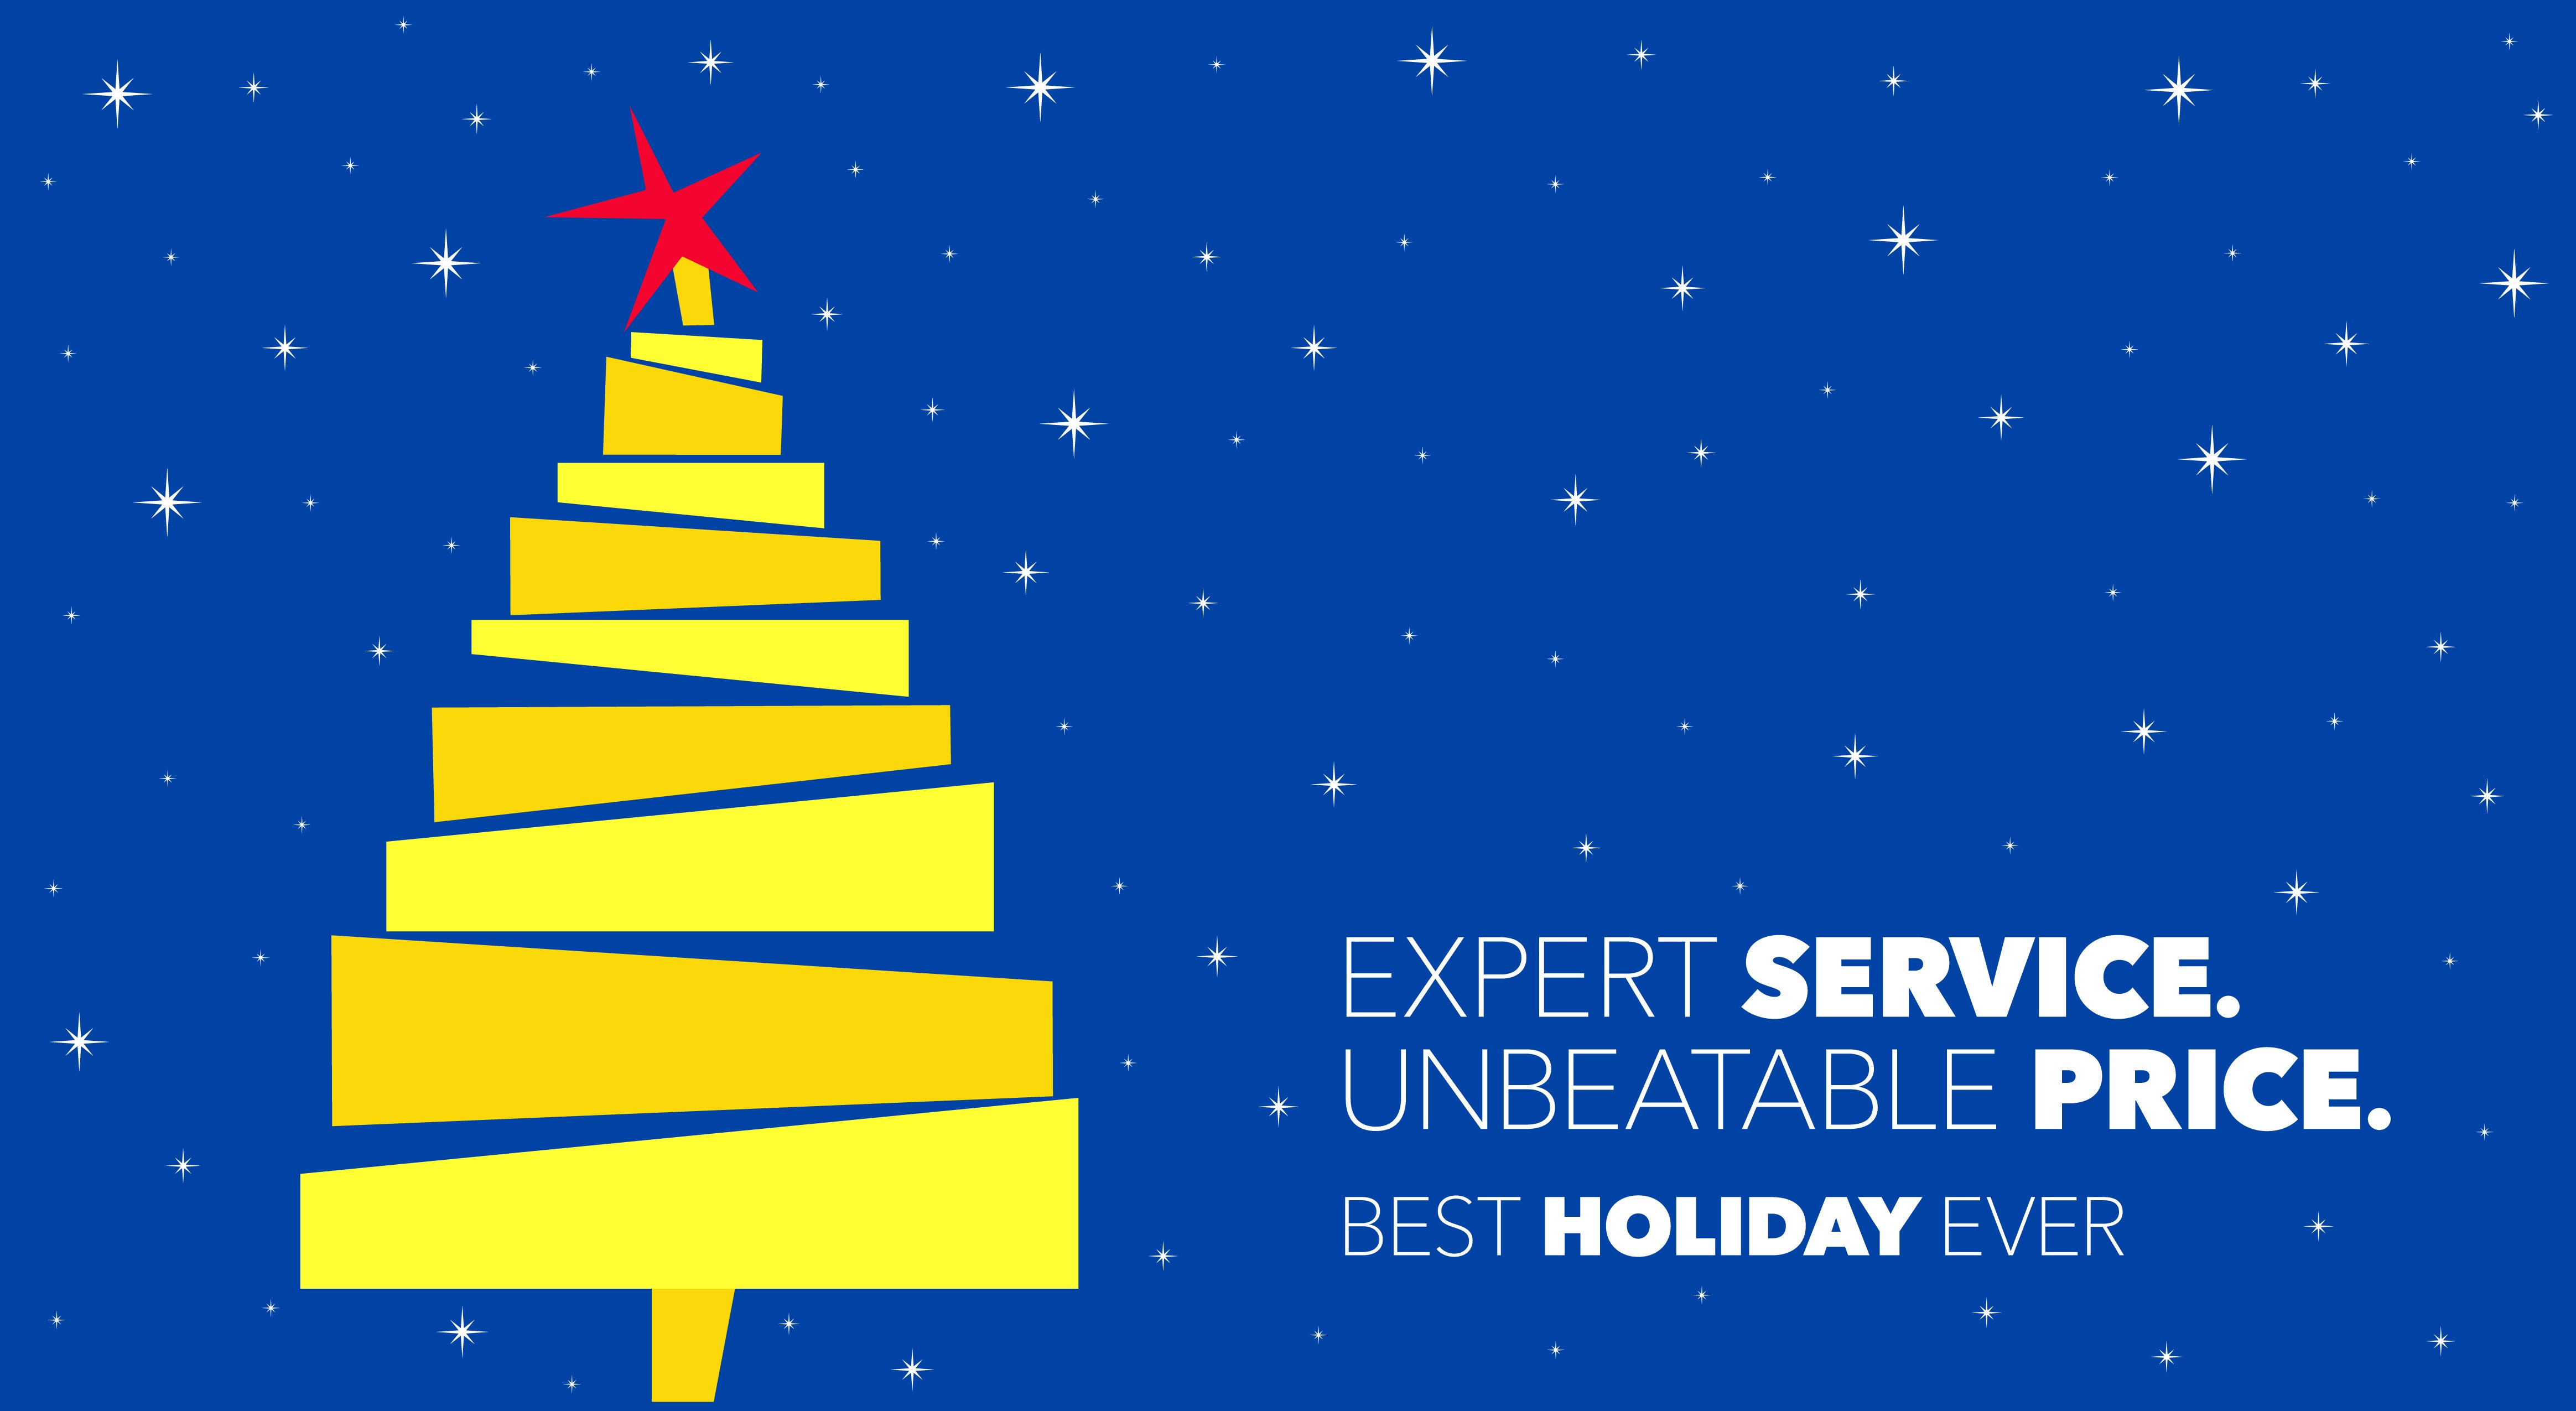 Last minute gift ideas from Best Buy during the #HintingSeason